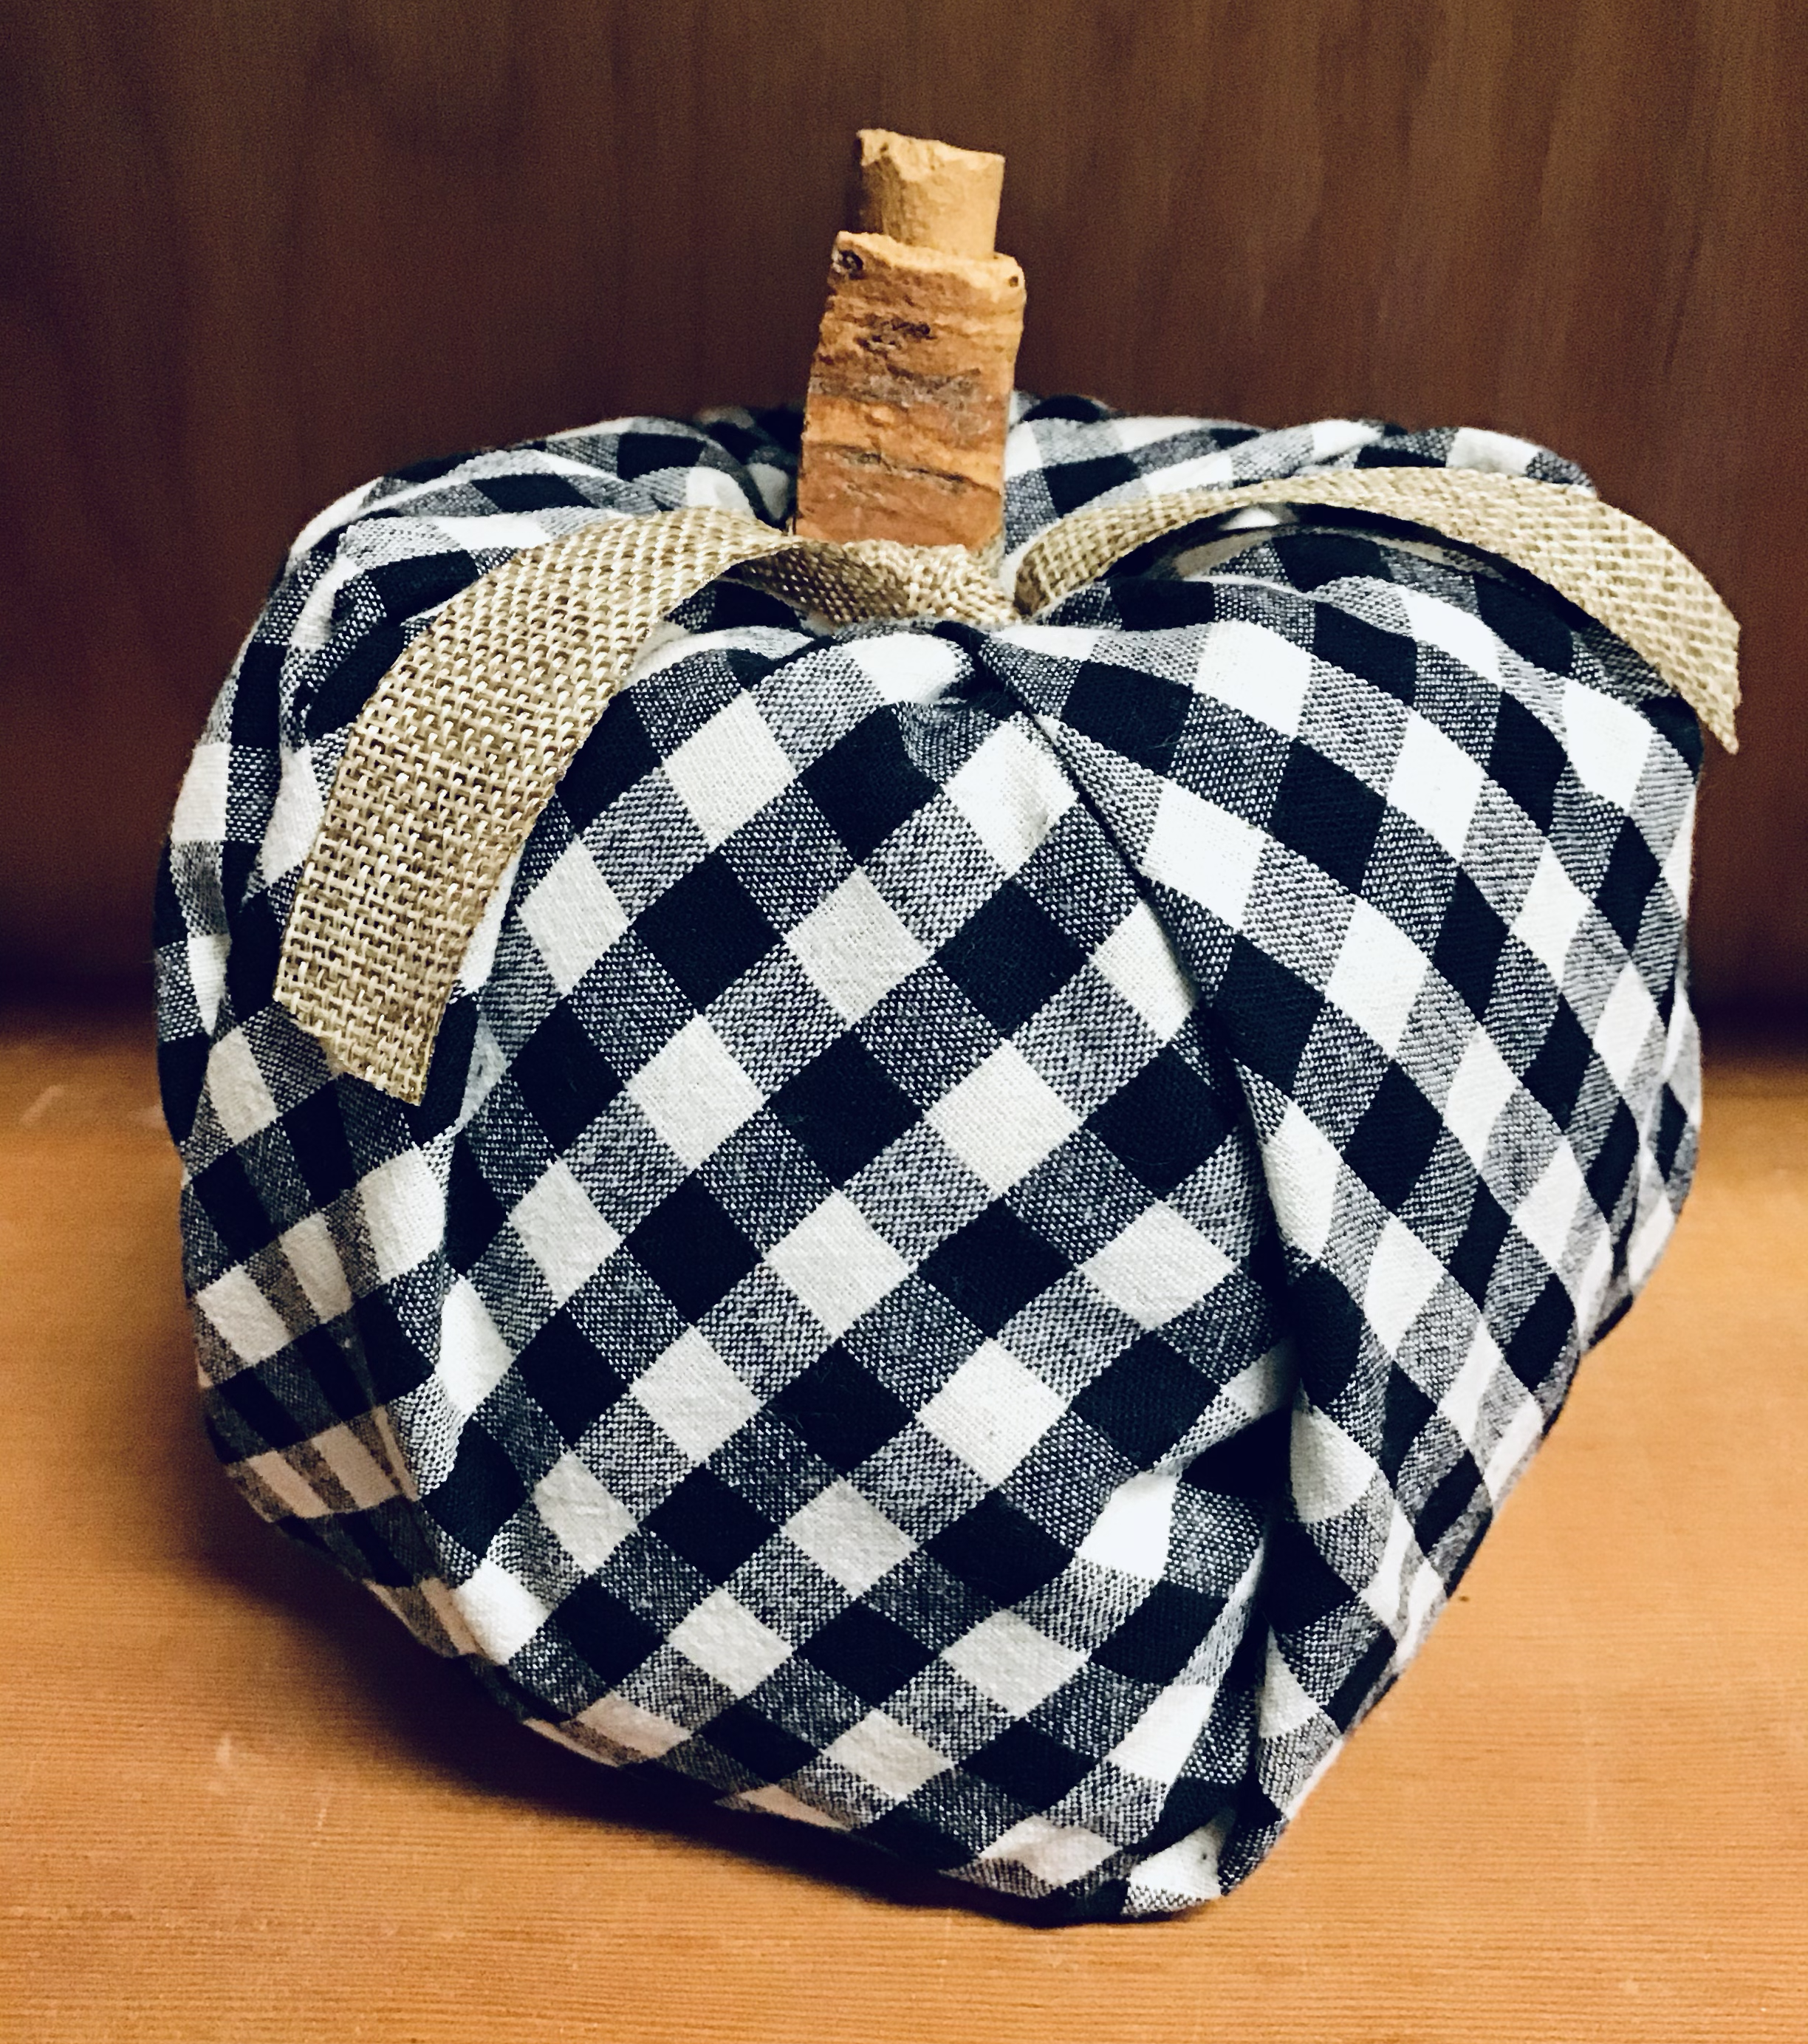 Black and white gingham fabric pumpkin with cinnamon stick stem that has burlap ribbon tied to it.